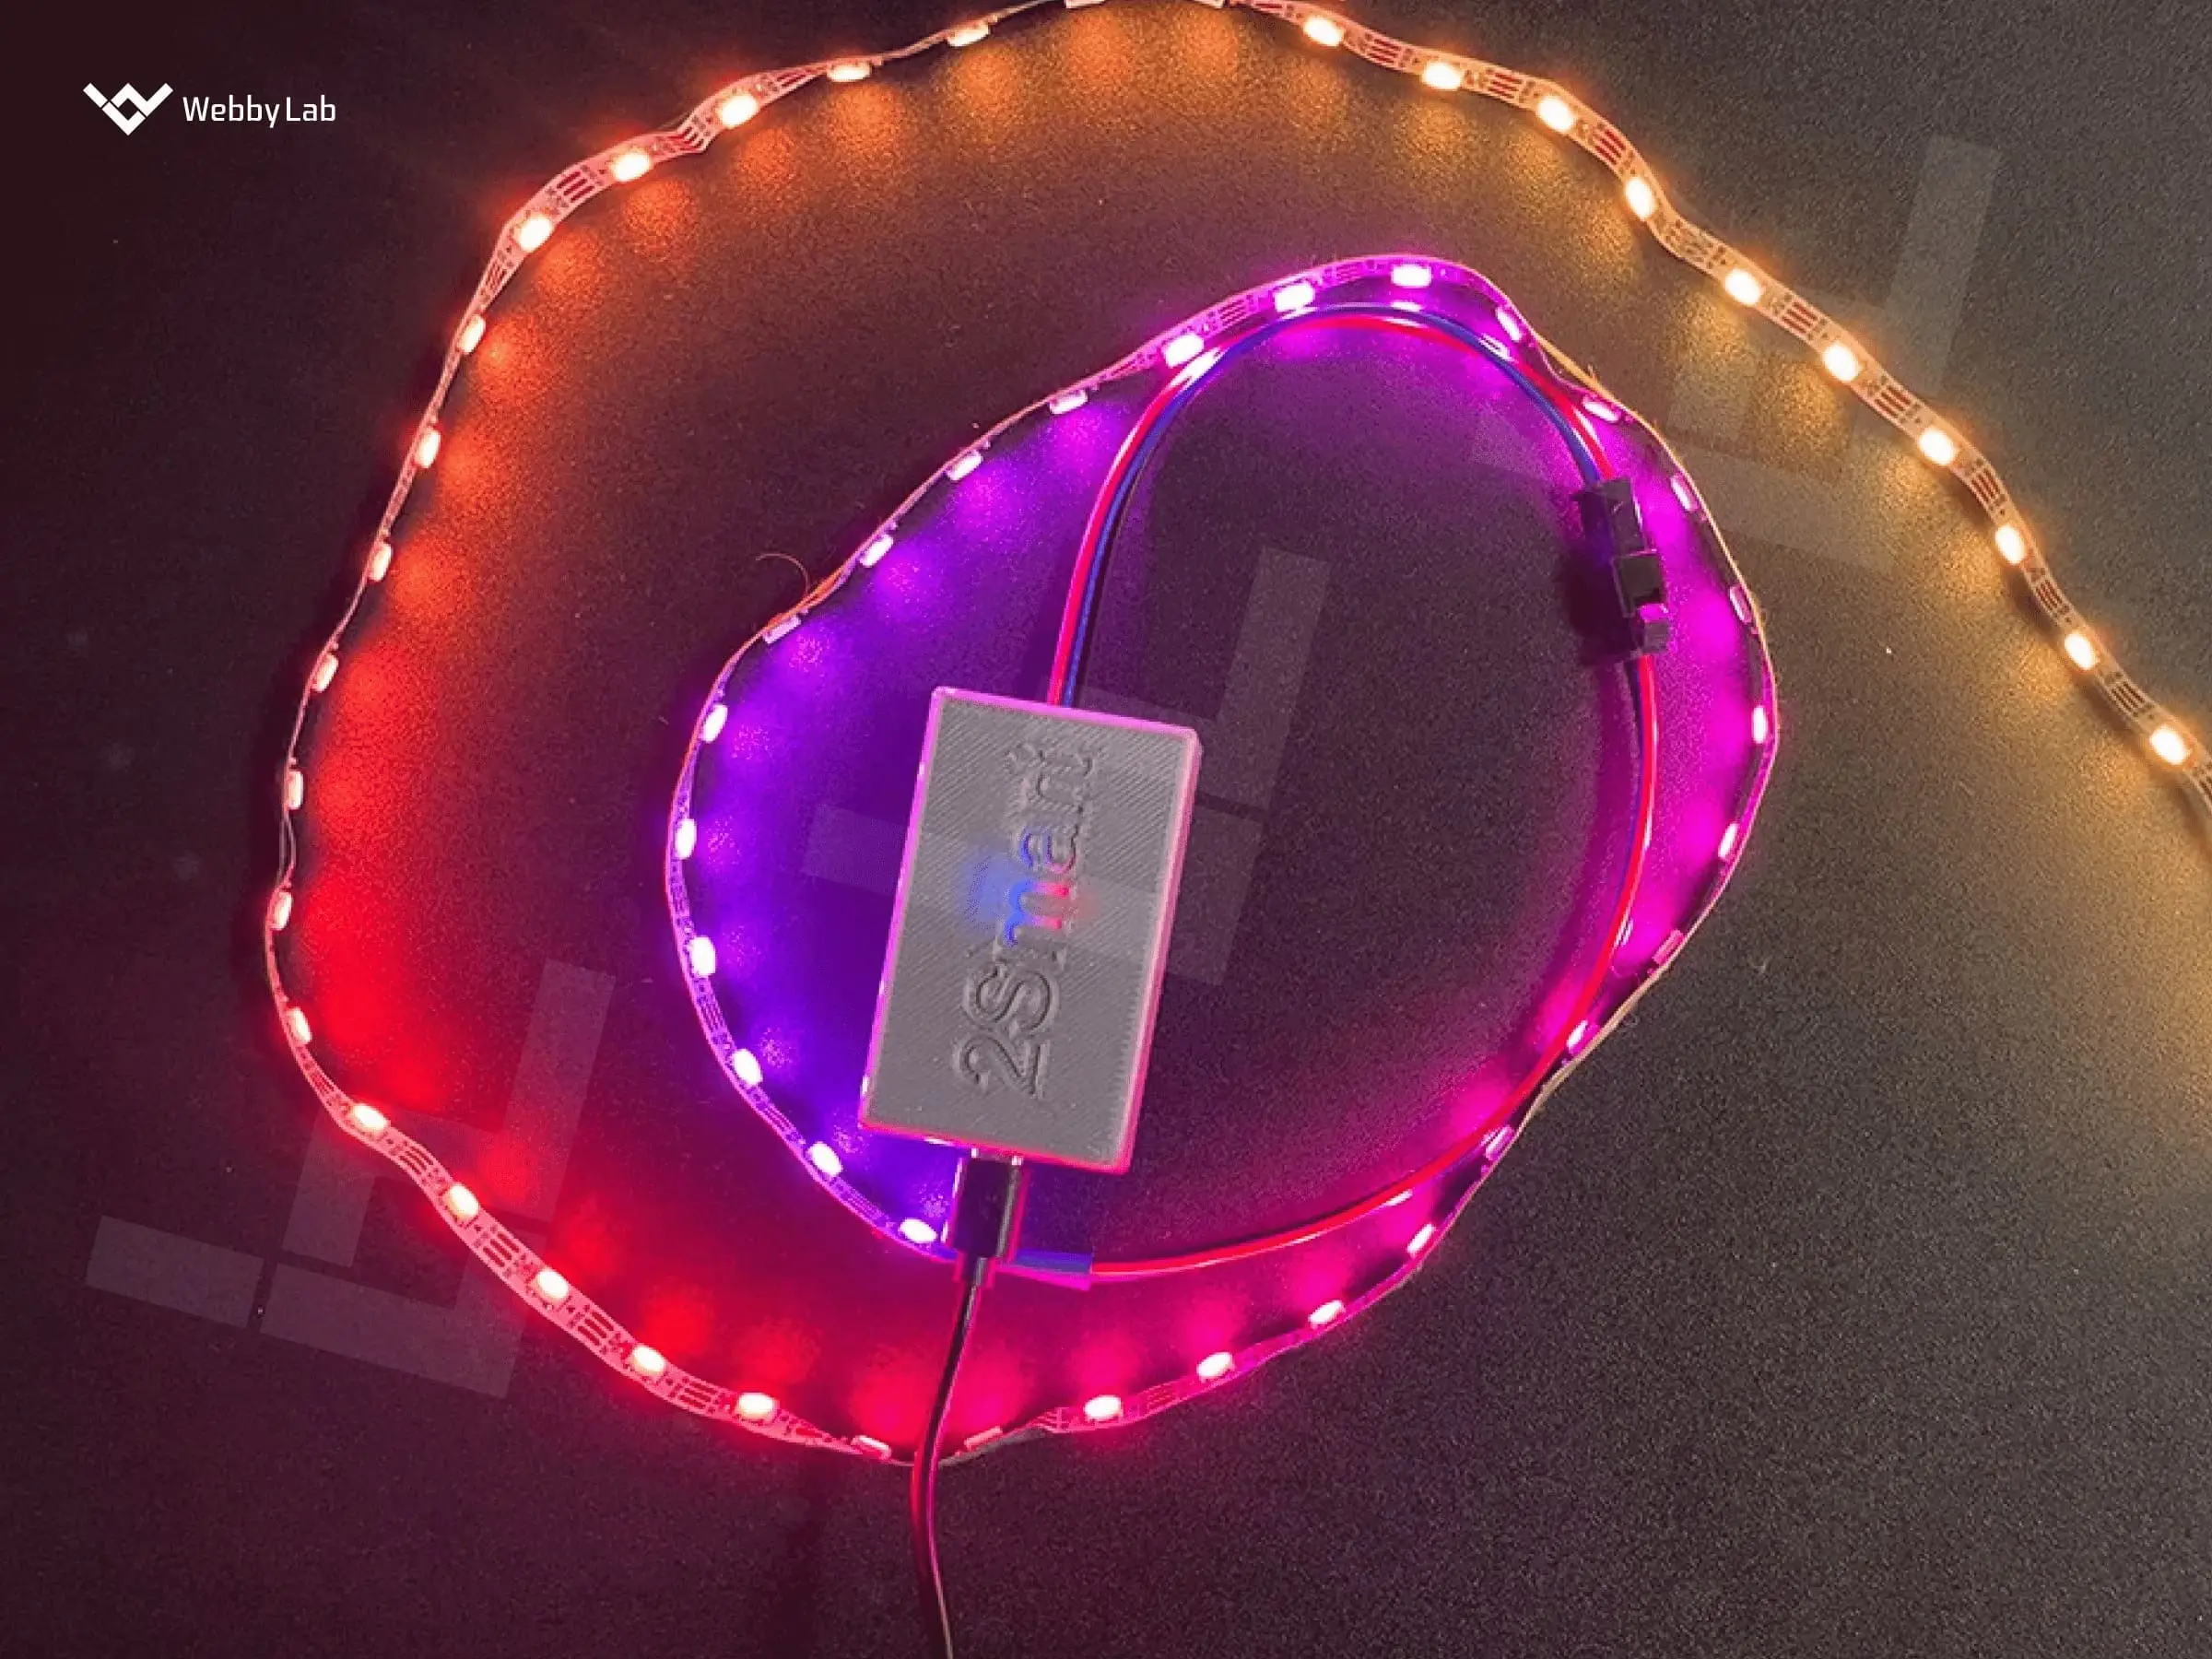 The led strip controller that became the cornerstone of the smart lamp developed by the WebbyLab team